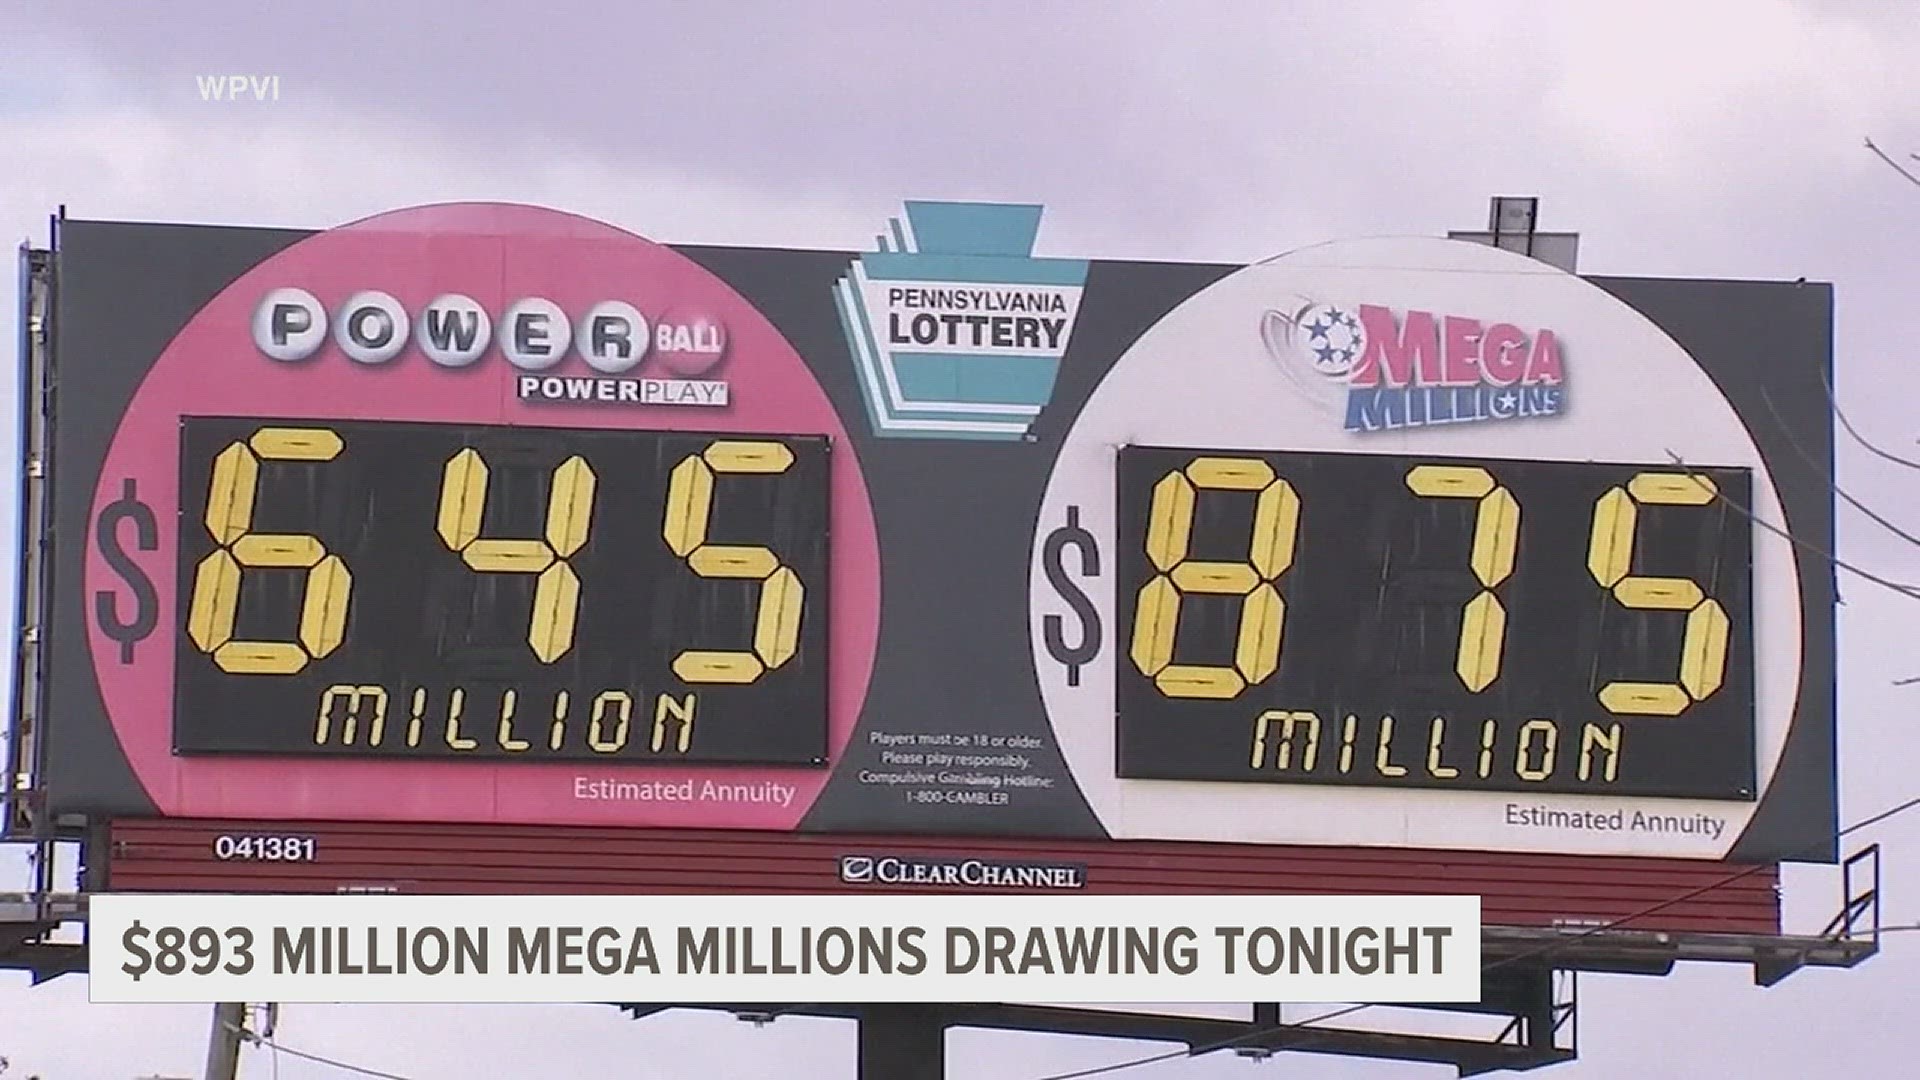 Tuesday night's Mega Millions drawing is at $893 million with the Powerball not far behind at $687 million.